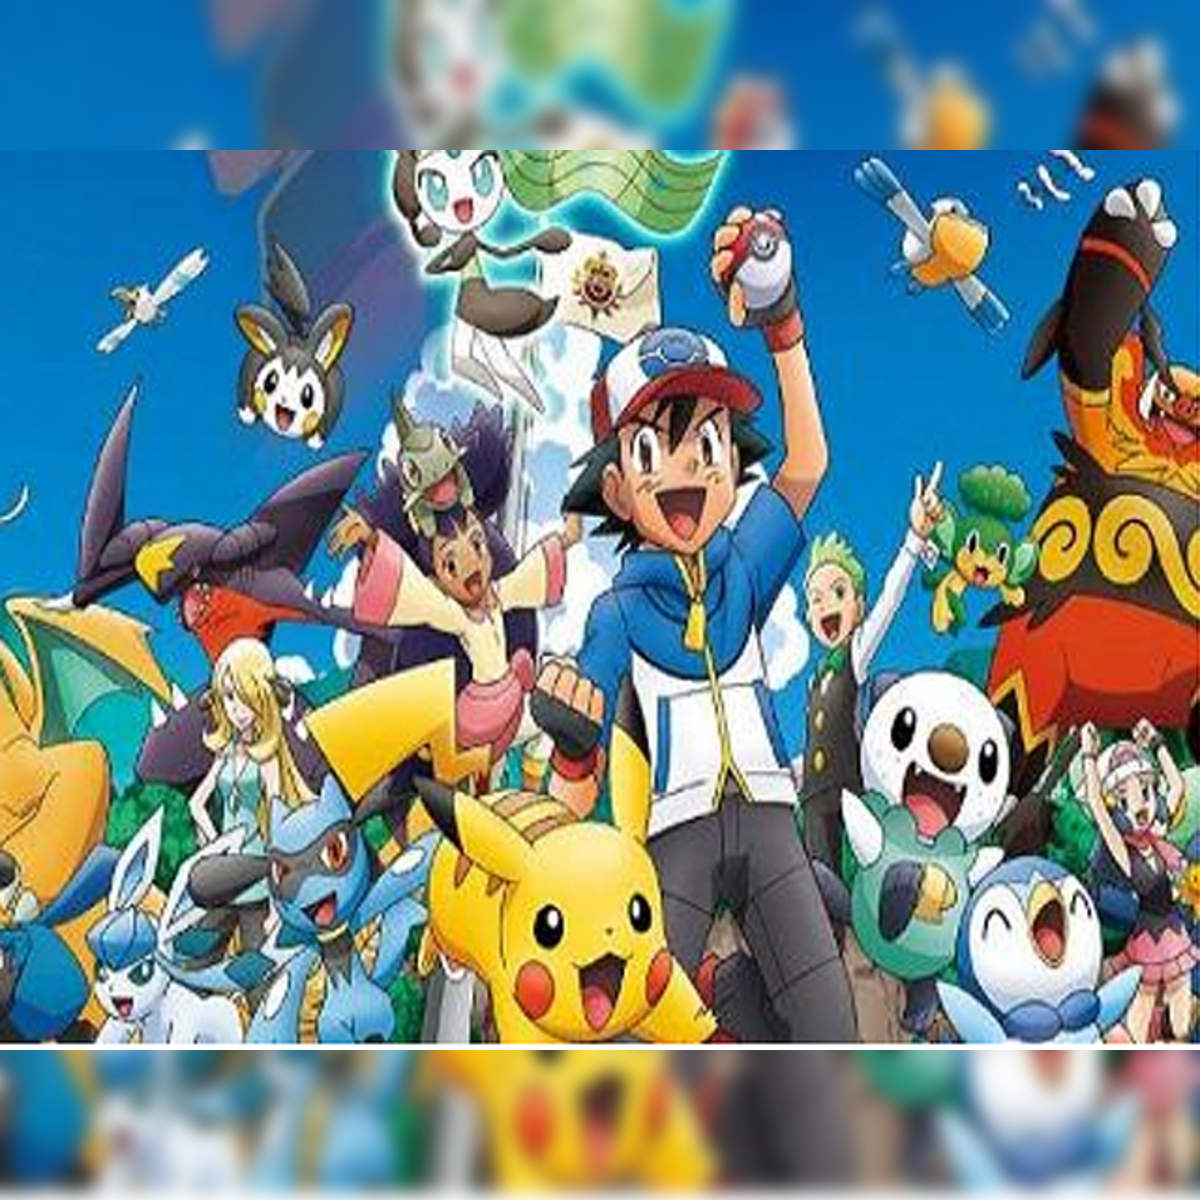 This Lost Pokémon Game Is Being Resurrected By Fans